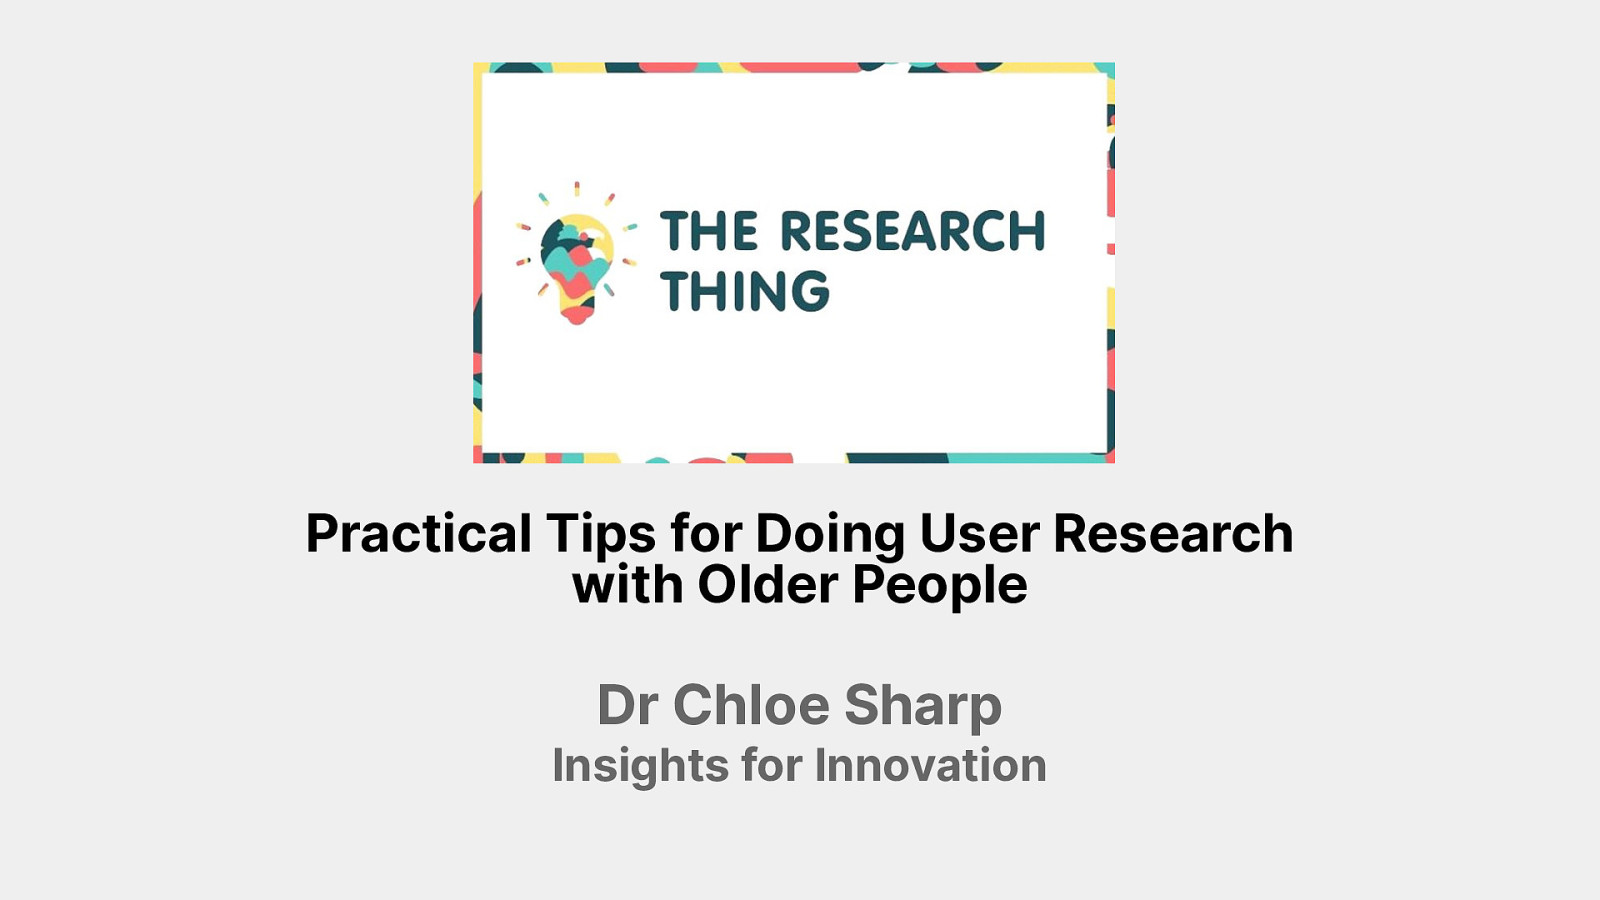 Practical Tips for Doing User Research with Older People